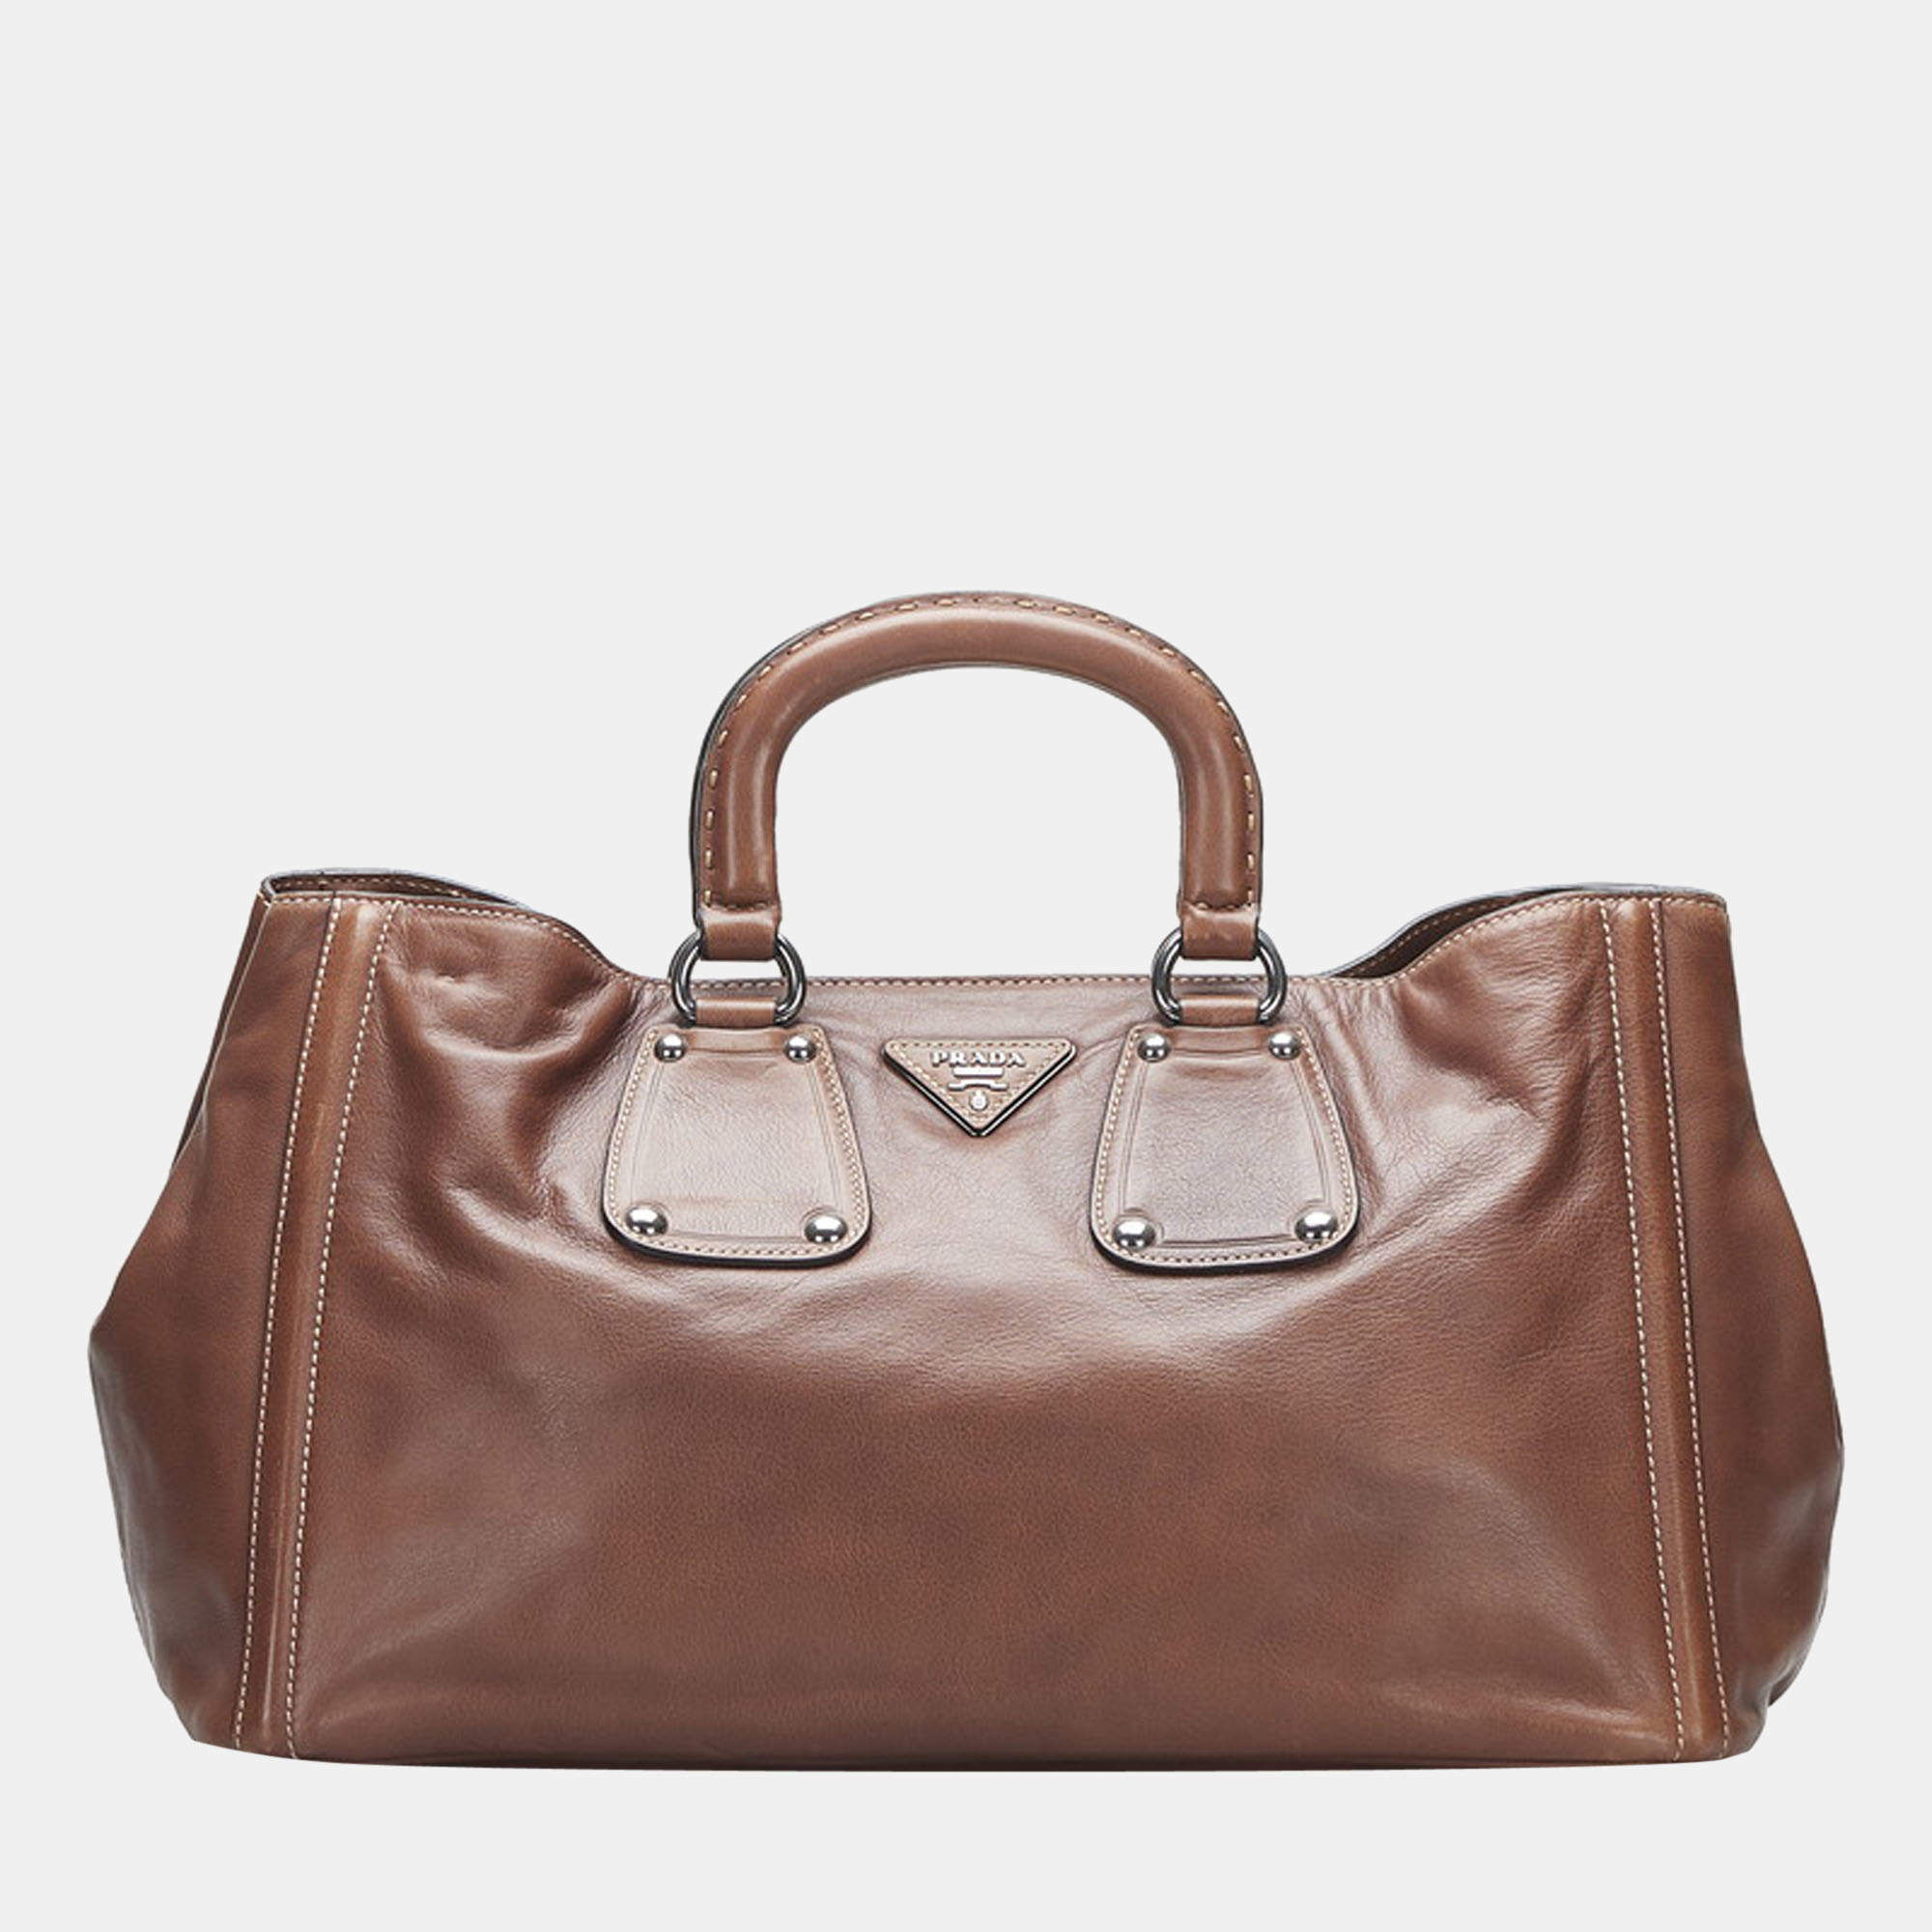 38 of the Latest Bags for Ladies to fit their Personal Style | Bags, Prada  handbags, Latest bags